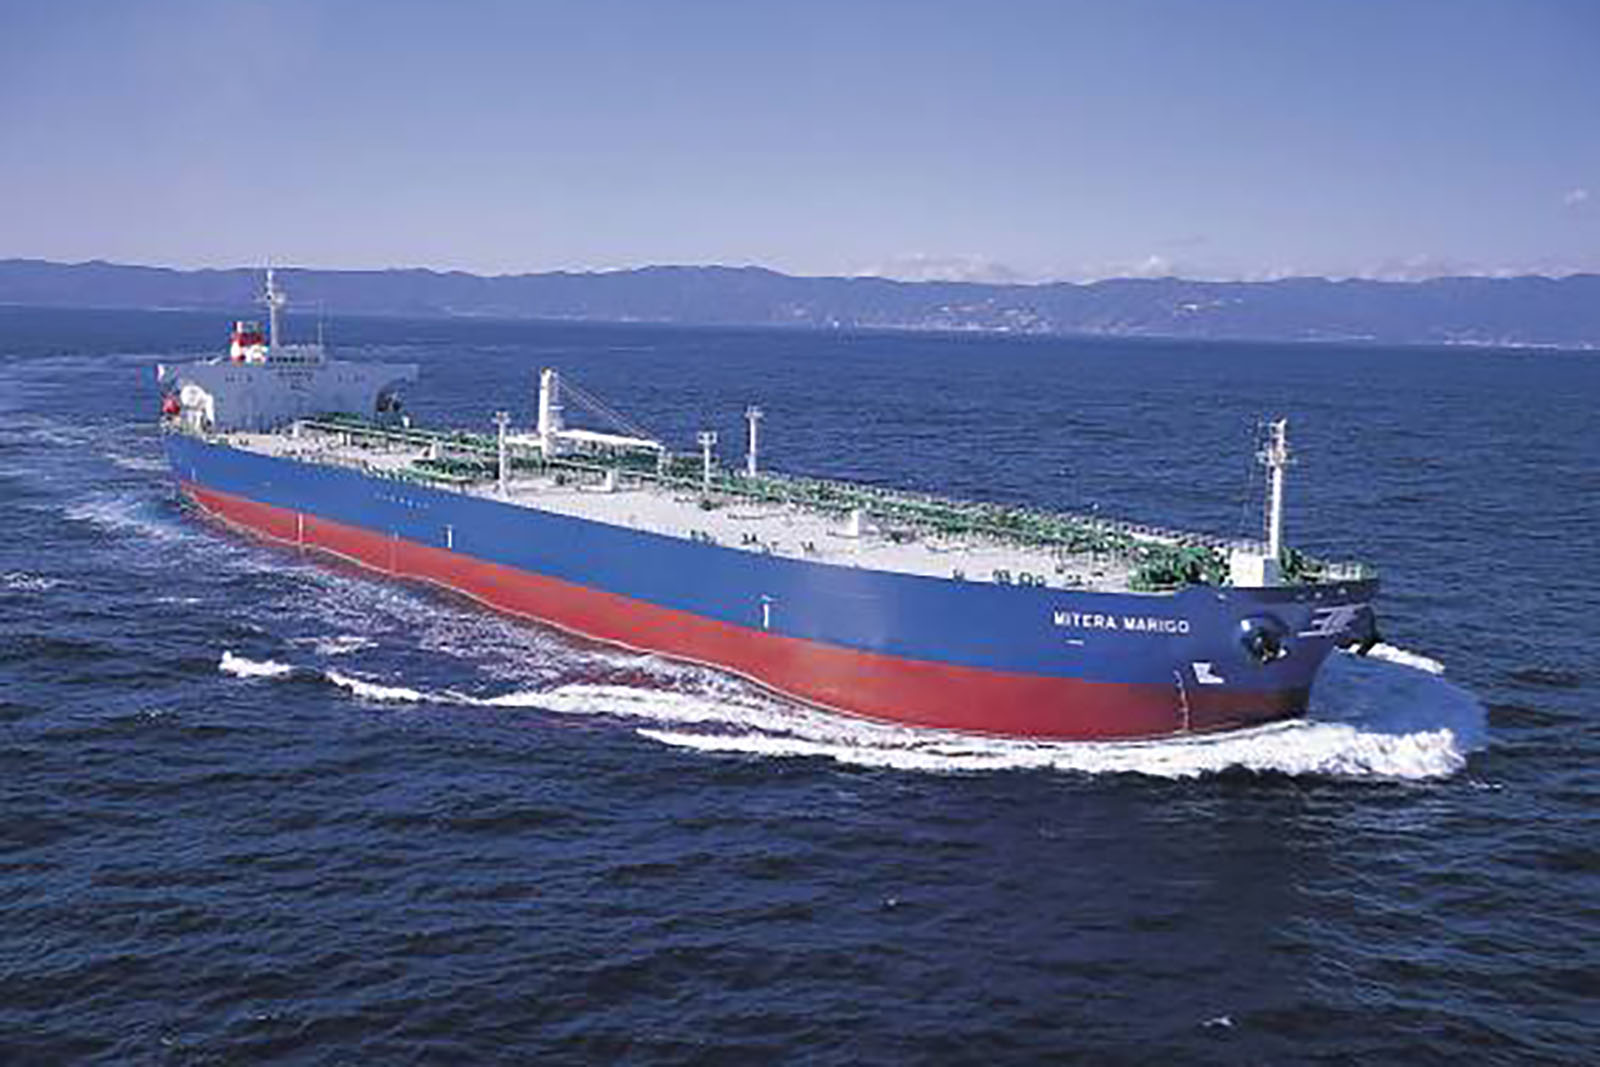 Oil tanker on the ocean with a land mass in the background